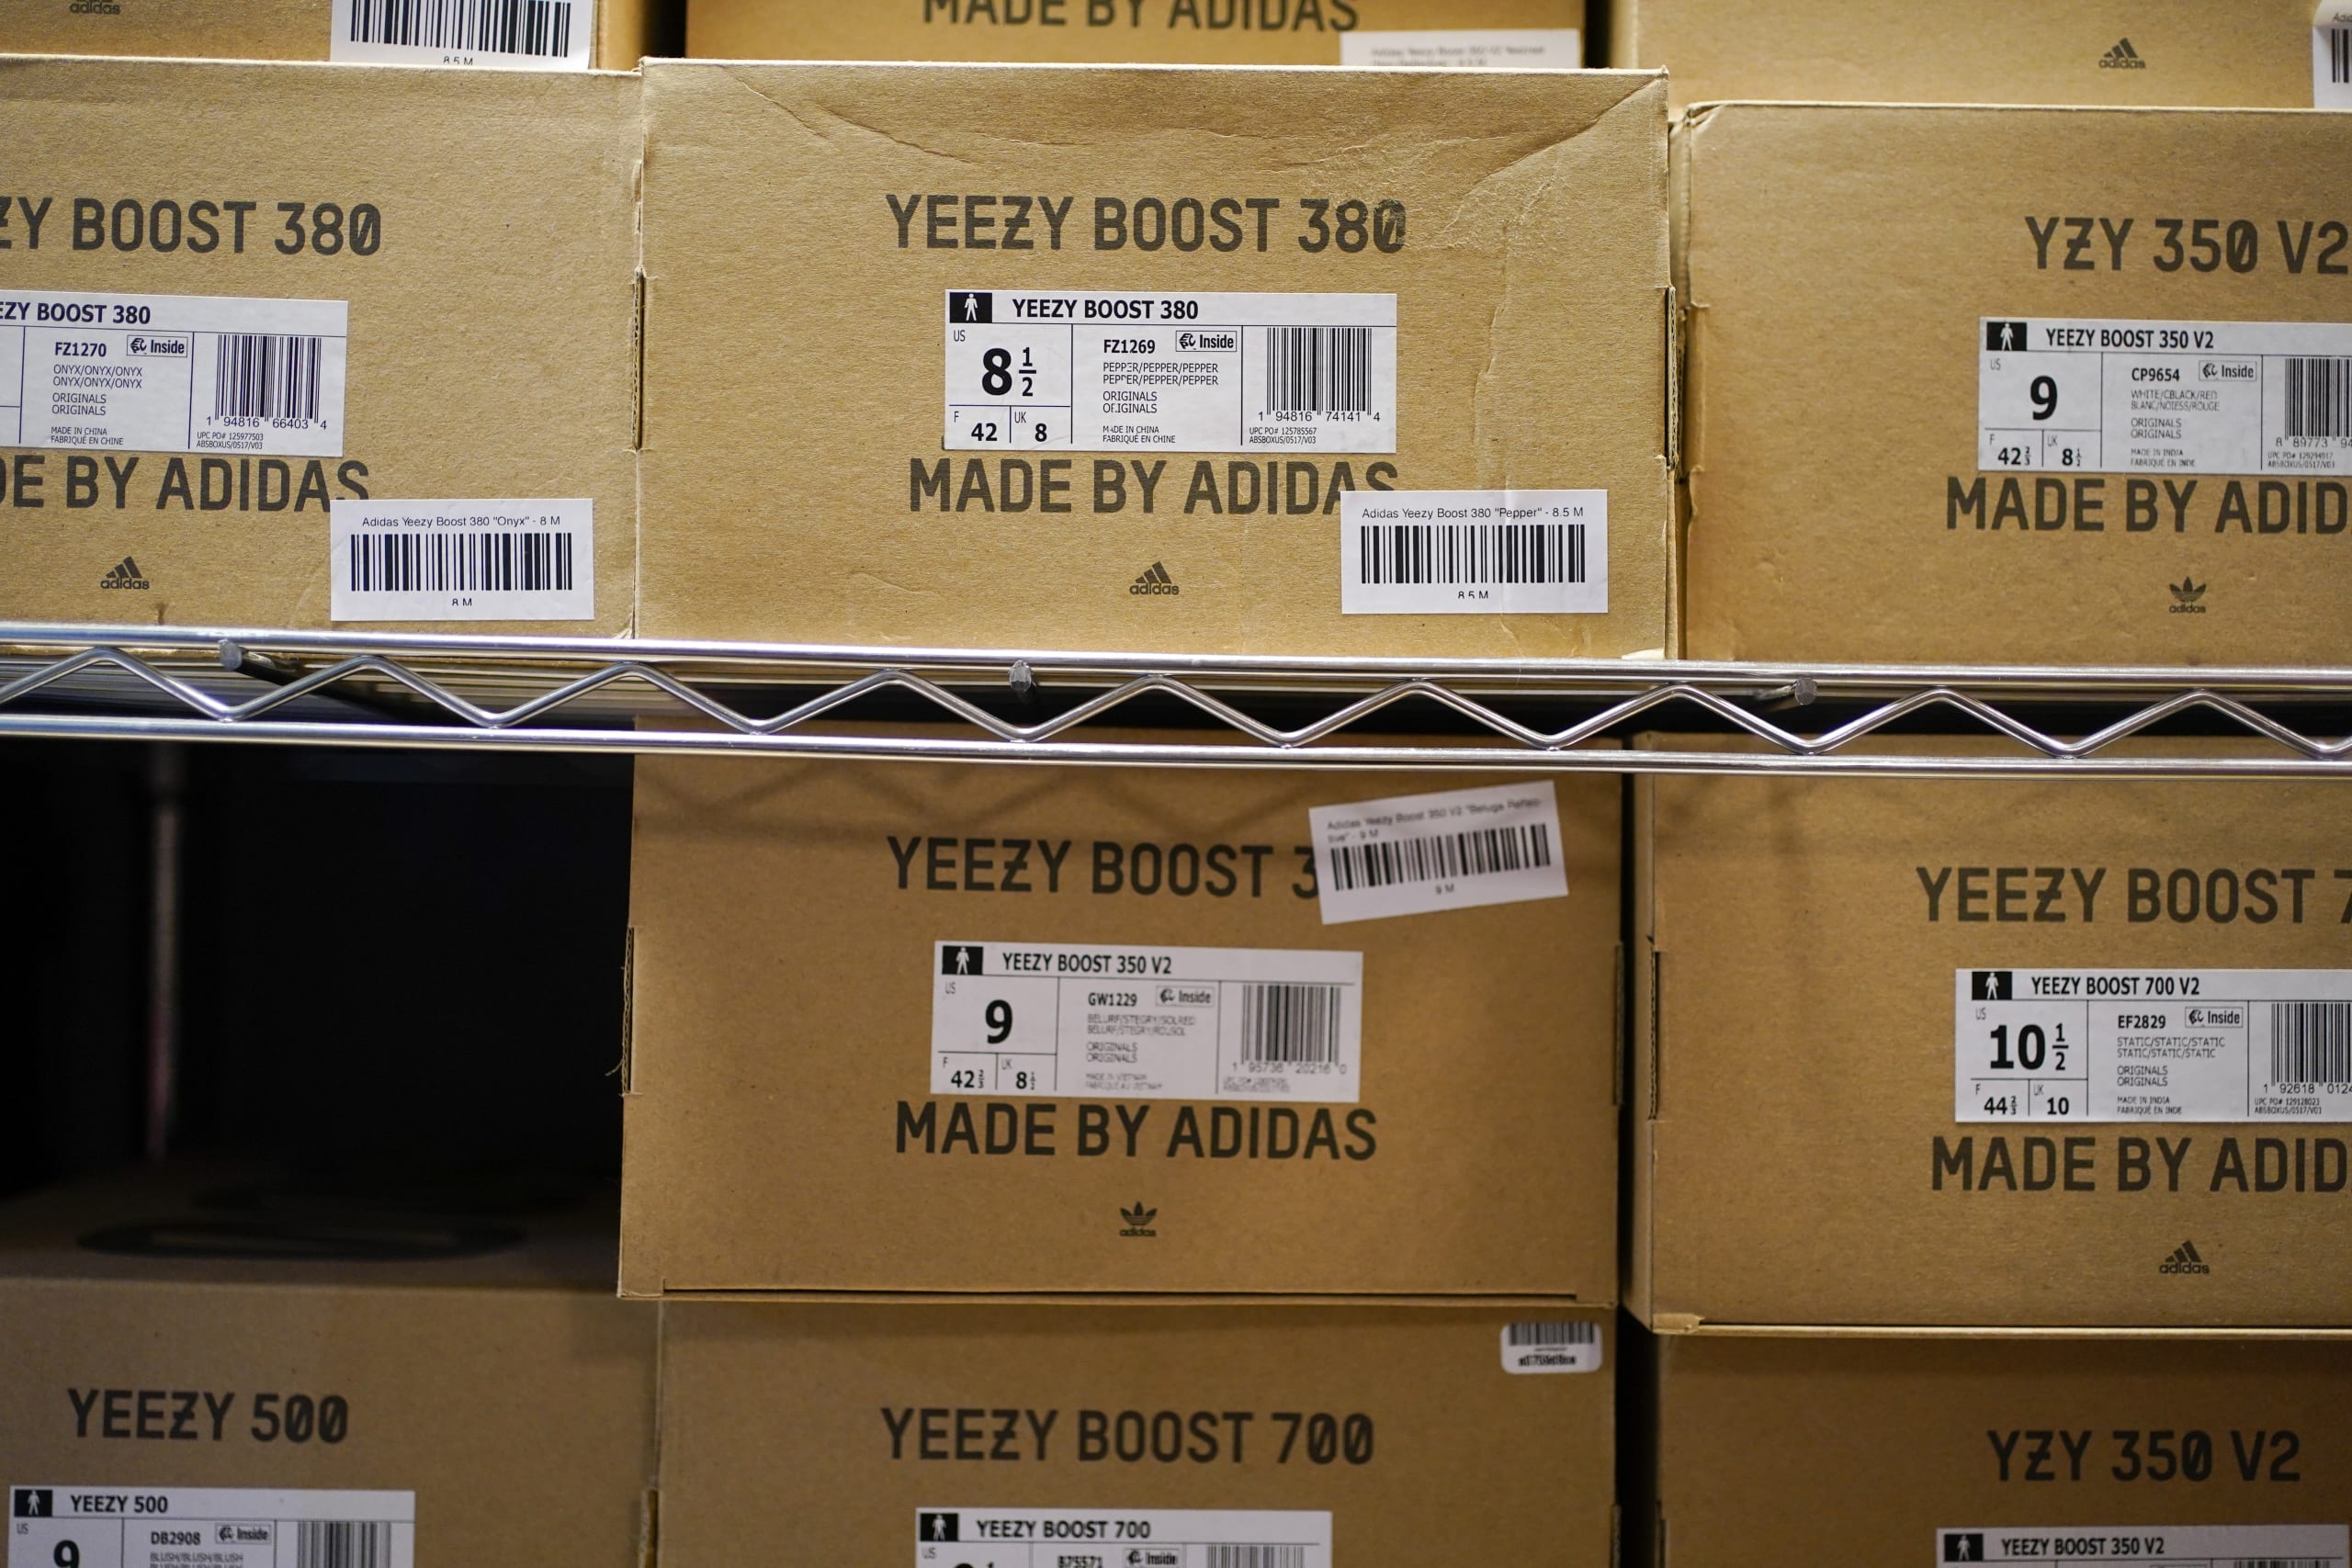 Adidas has no idea what to do with all of those Yeezy shoes